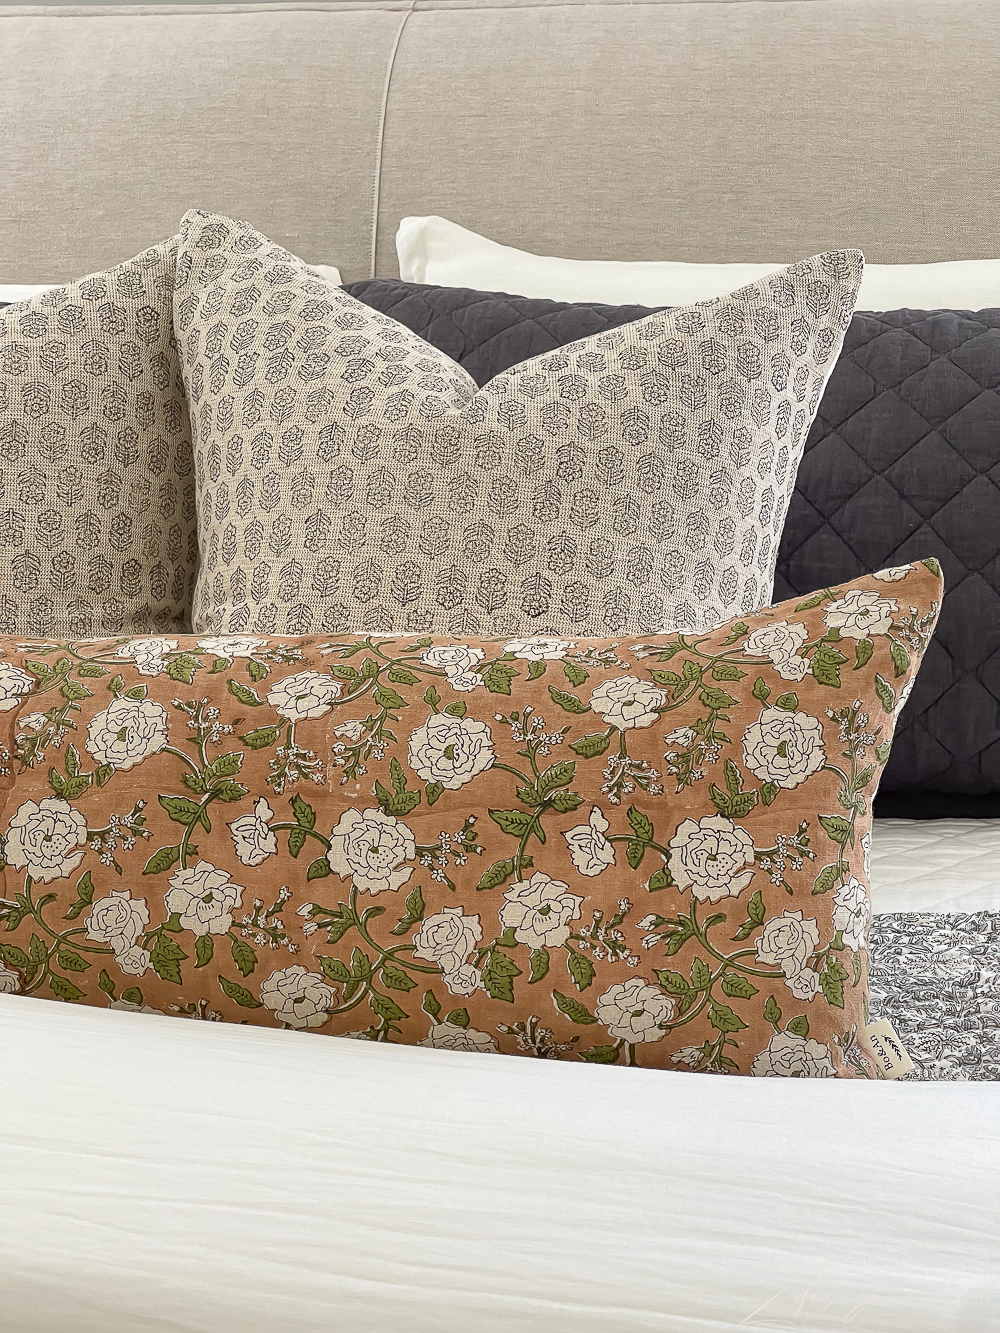 block and floral print pillows on bed 